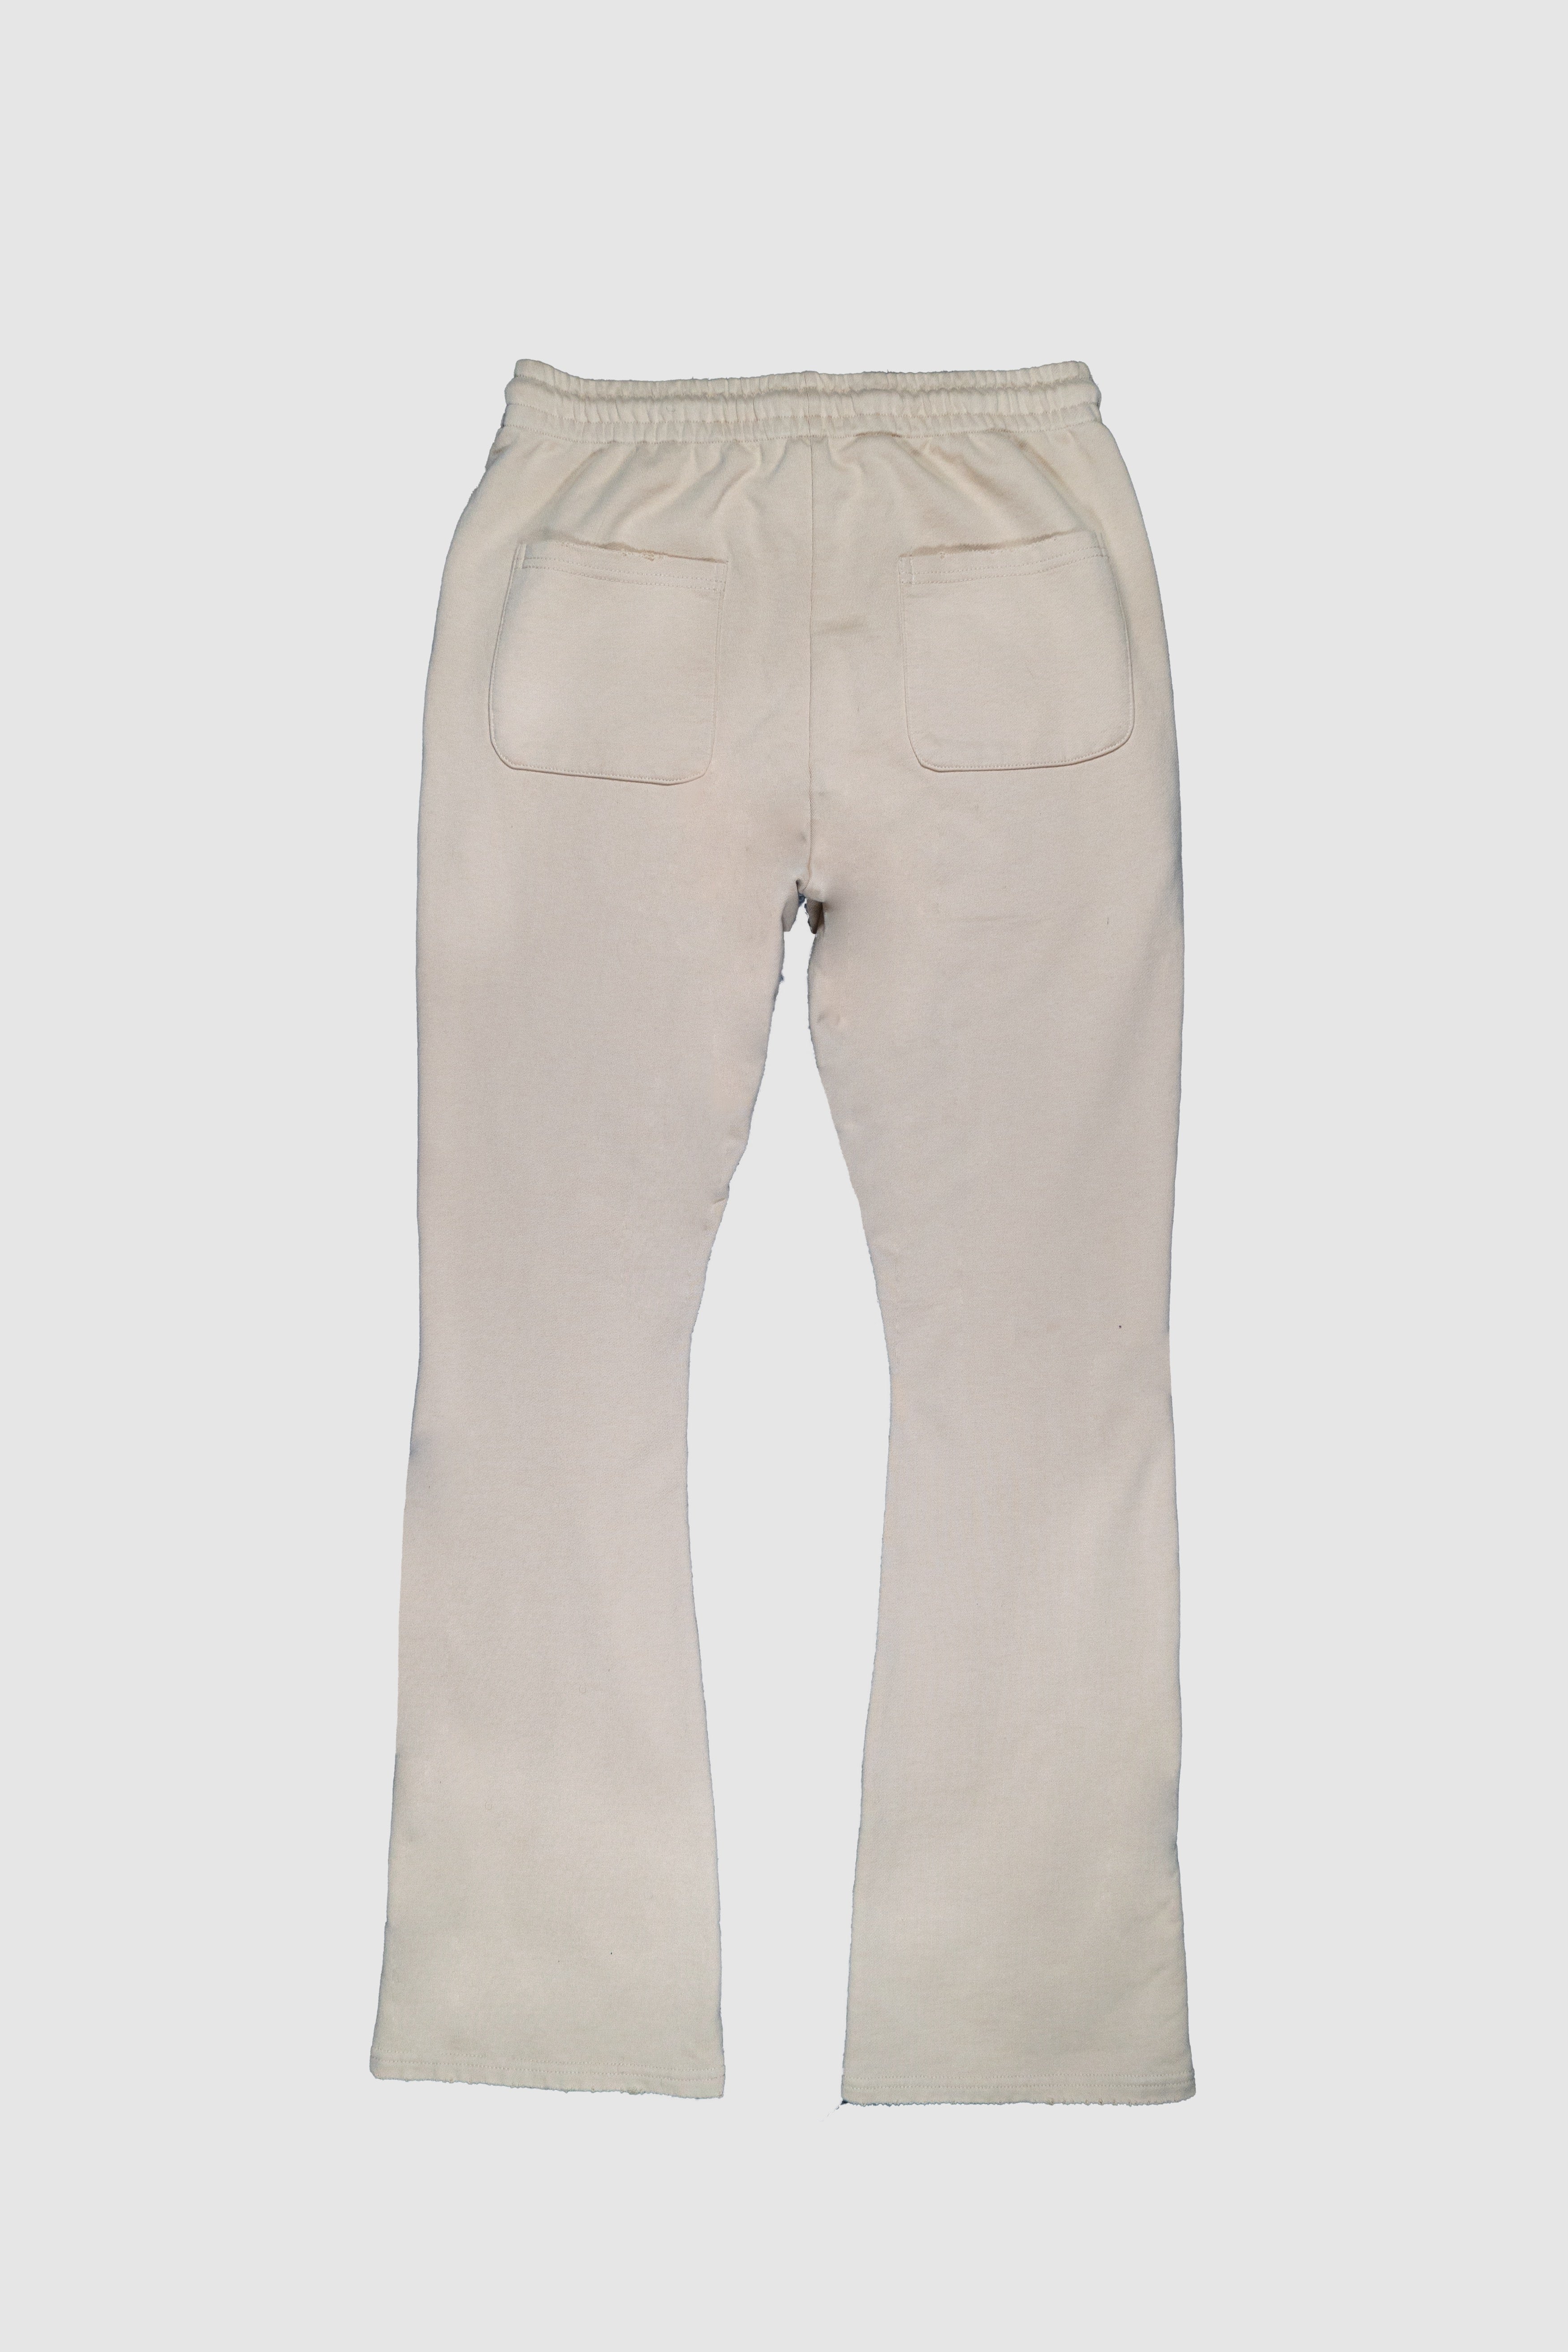 6thNBRHD STACKED PANTS "PIT STOP" CREAM